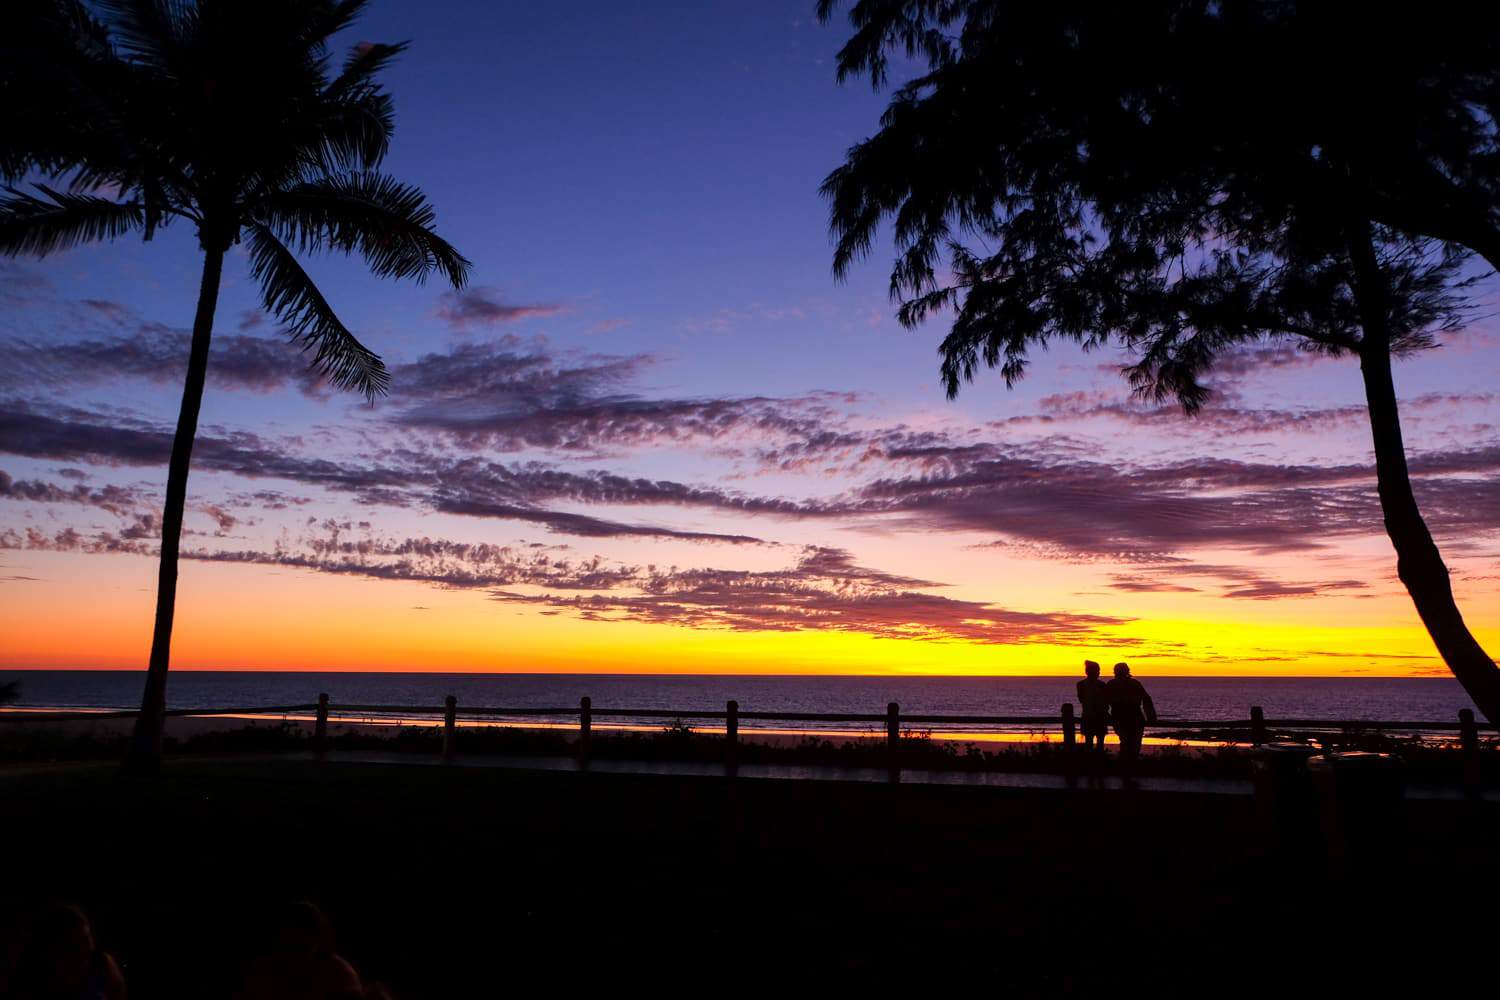 Sunset over Cable Beach in Broome, Western Australia